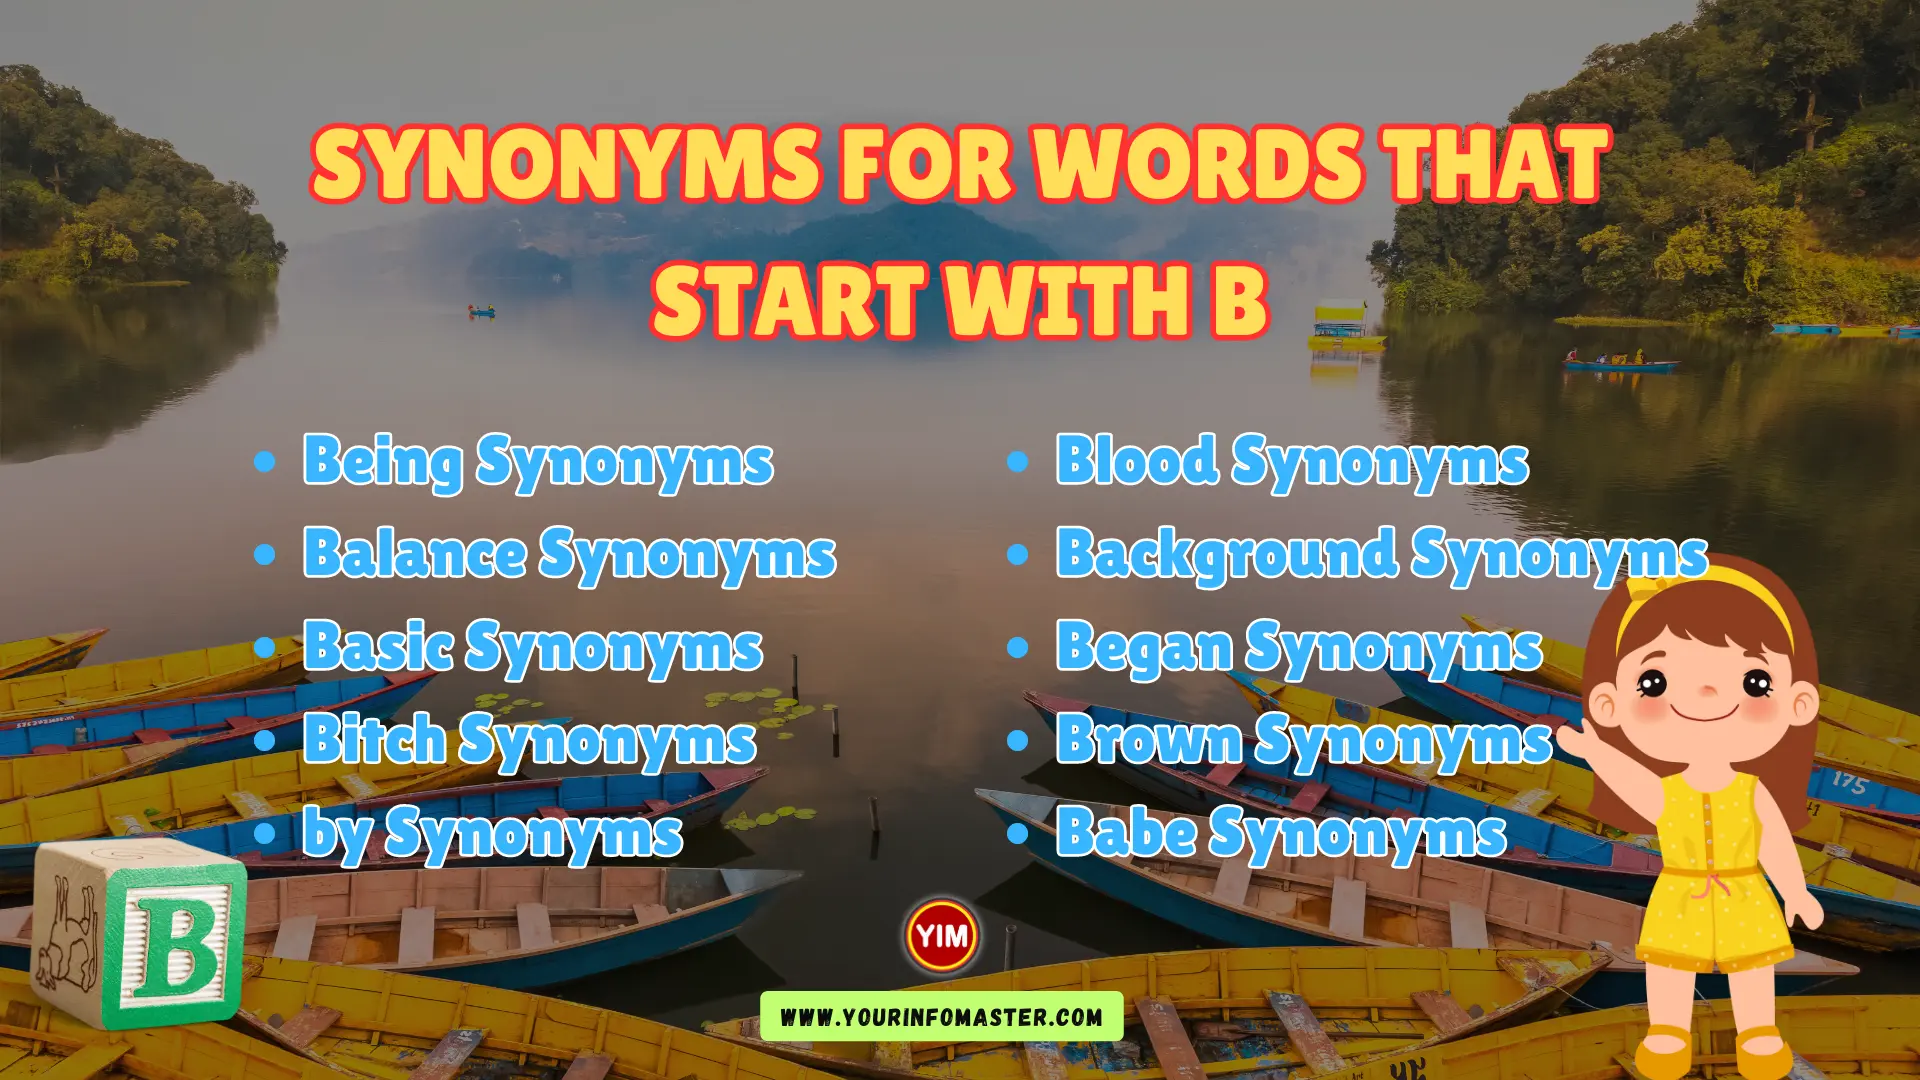 Synonyms for Words that start with B